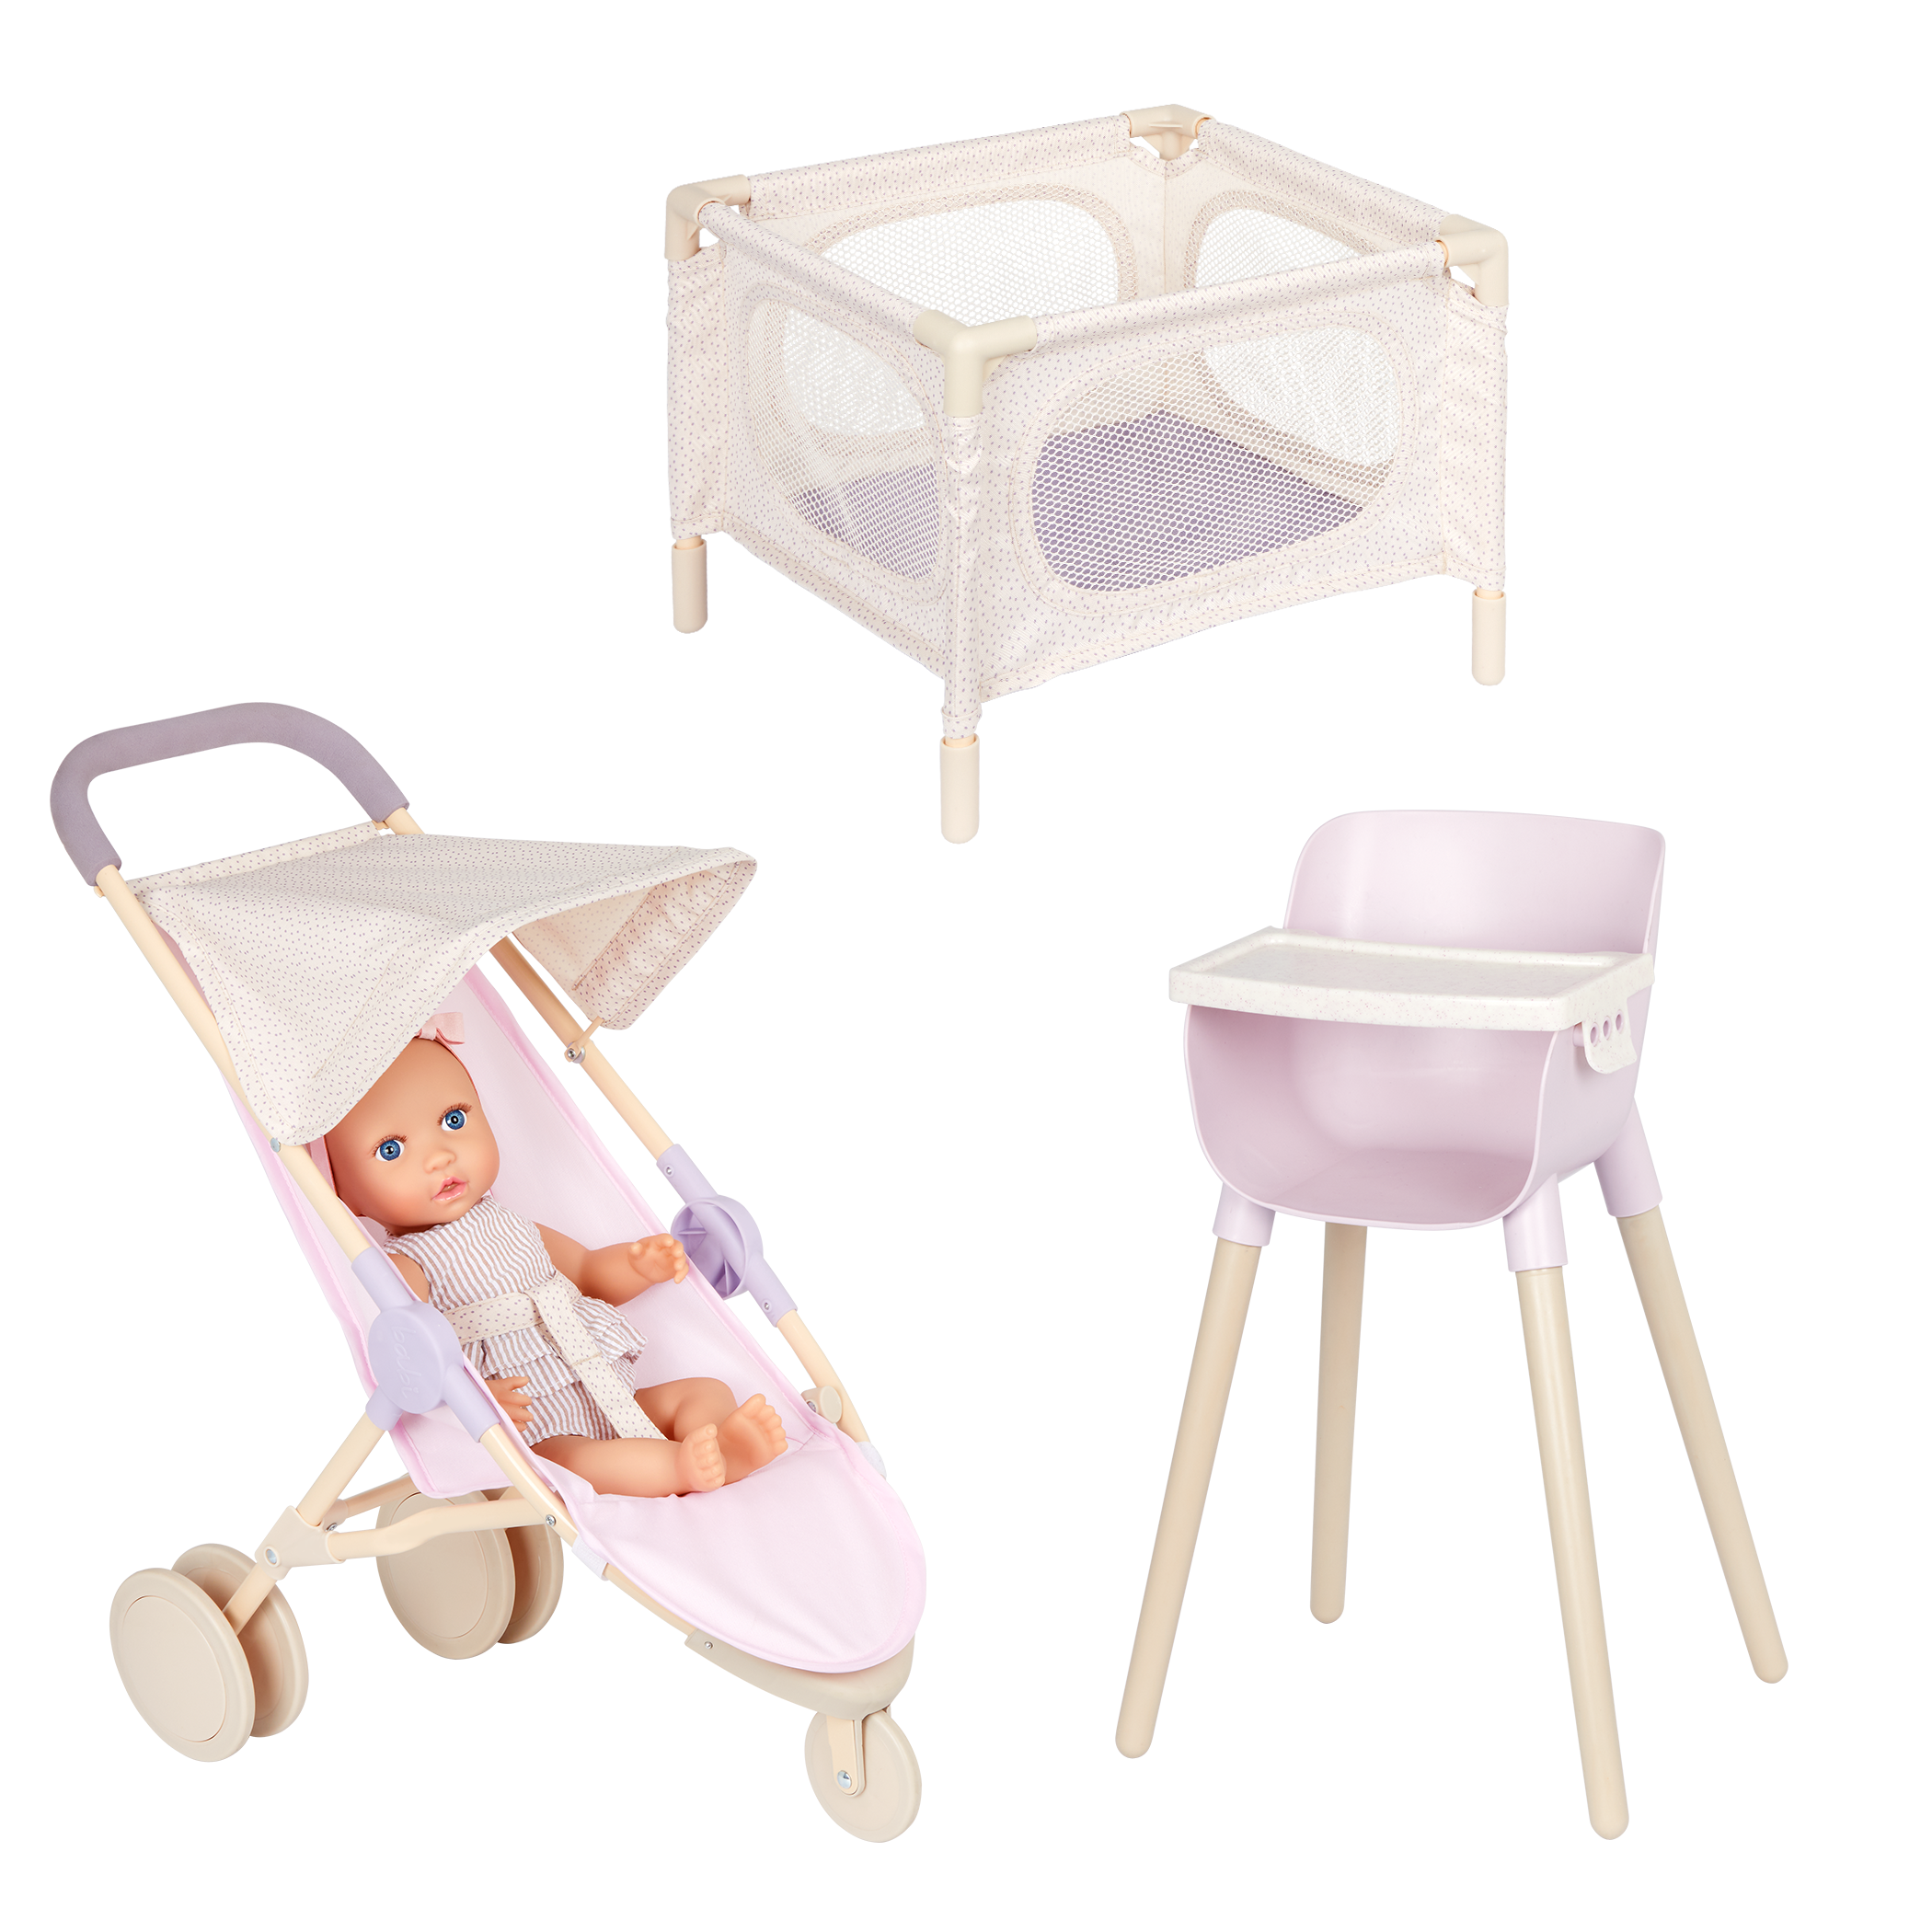 Baby Doll Nursery Care Toy Set! Play Toys 